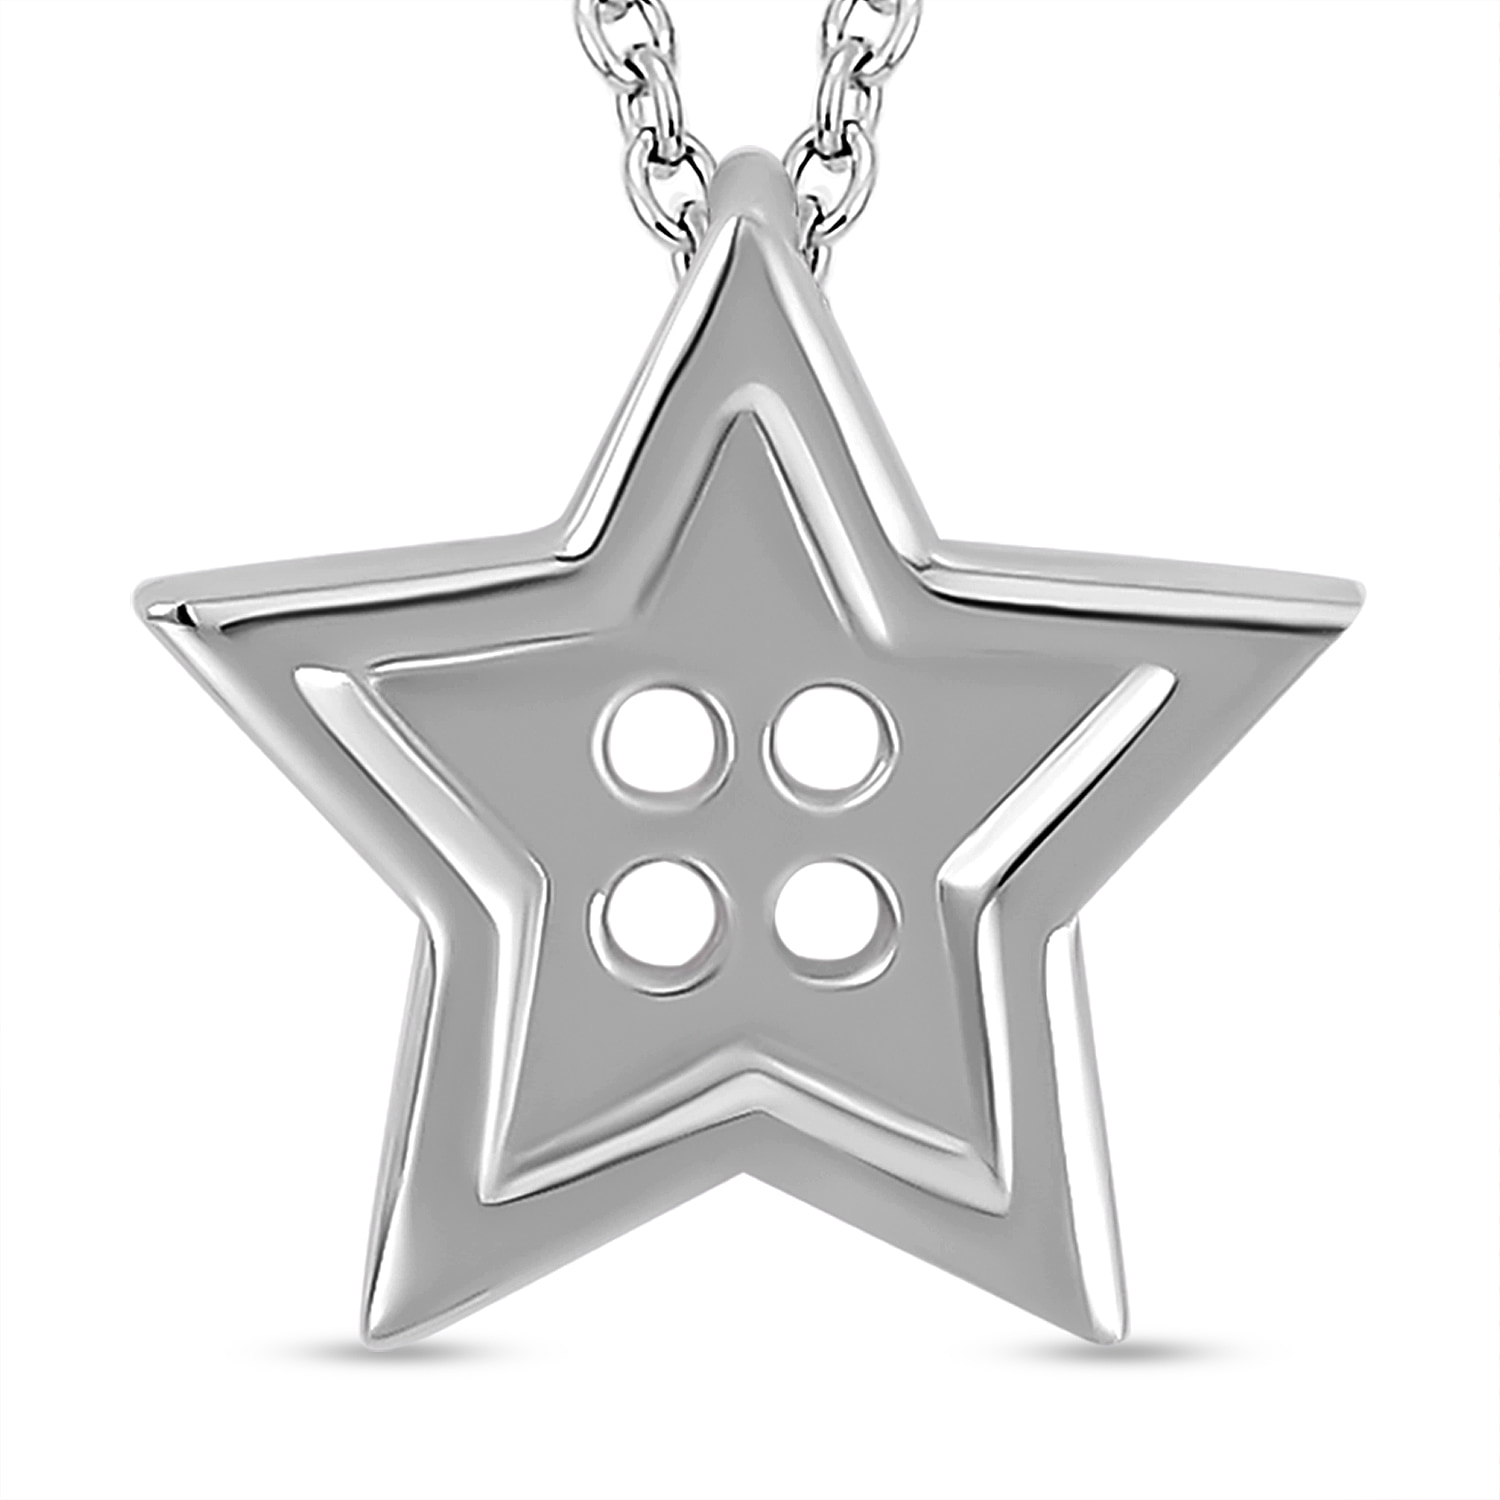 Lucy Q Button Collection - Rhodium Overlay Sterling Silver Star Pendant with Chain (Size -18-20), Silver Wt. 5.20 GM